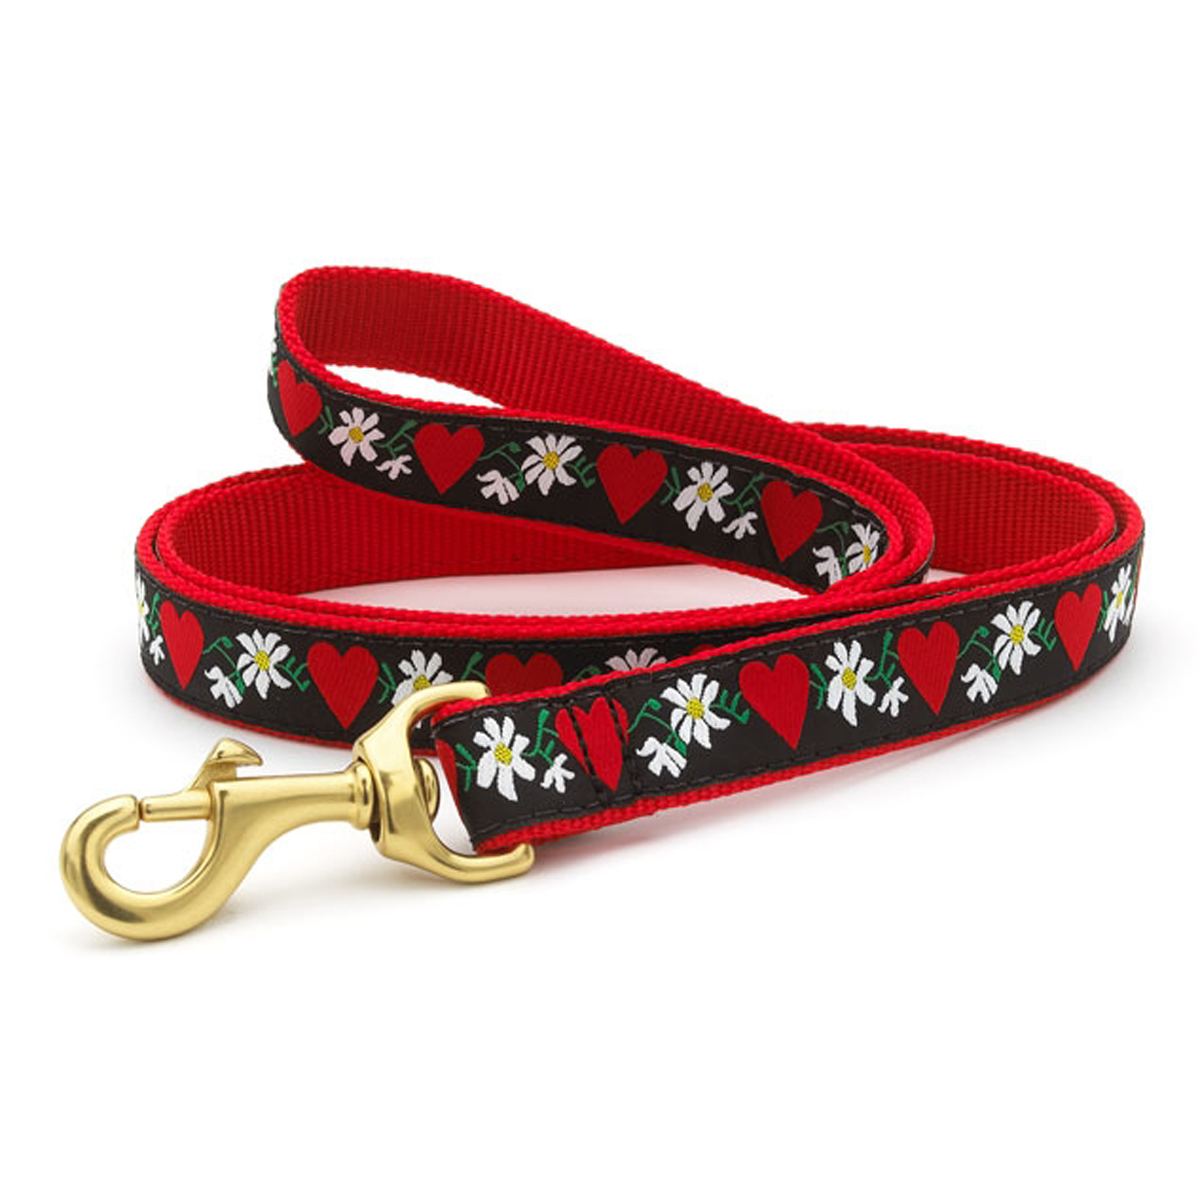 Hearts and Flowers Dog Leash by Up Country